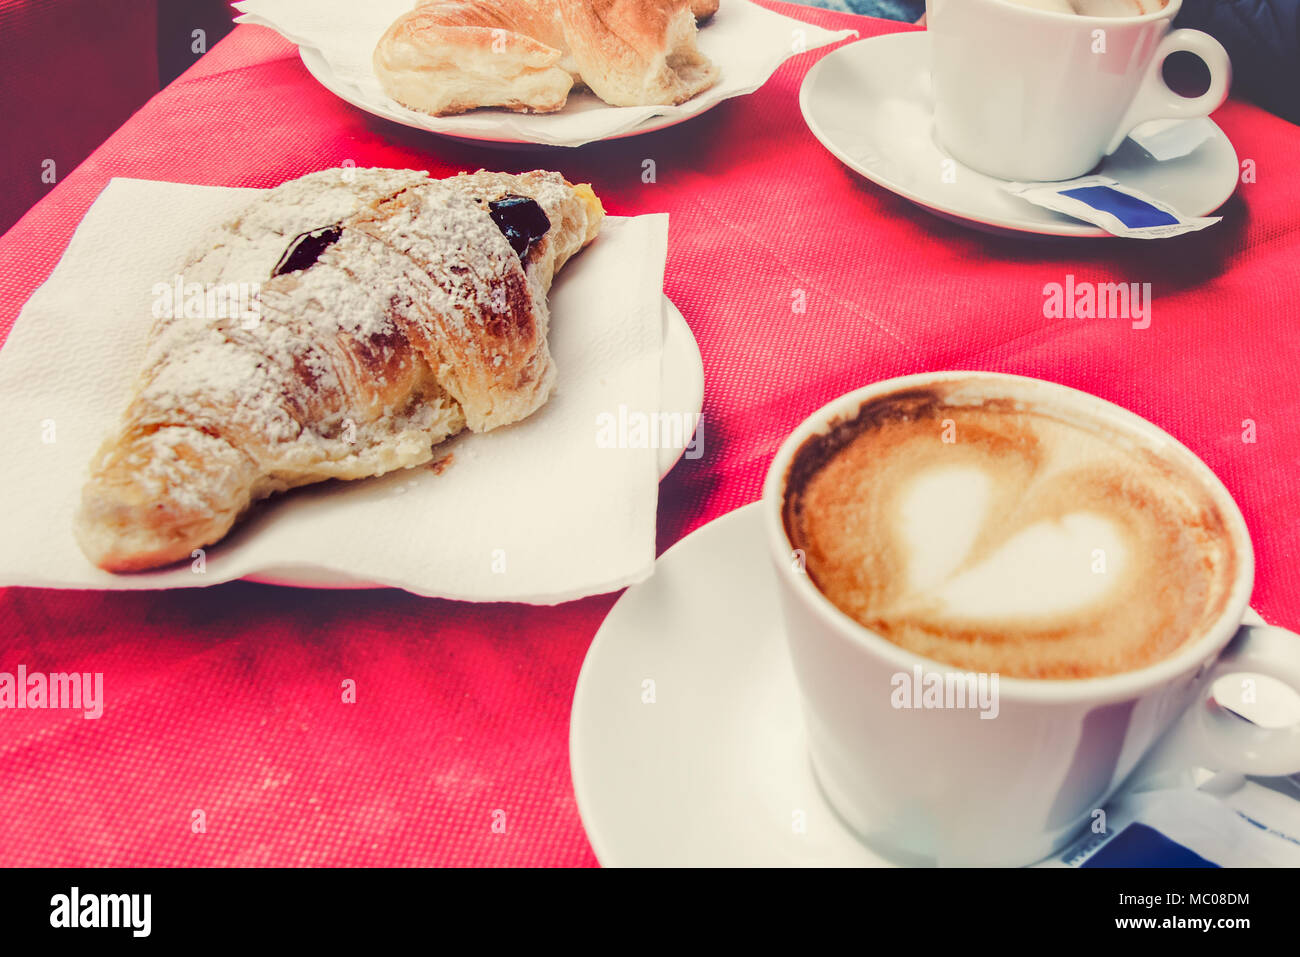 Morning breakfast in an italian restaurant - croissant and a cup of coffee with a heart shaped foam. Stock Photo